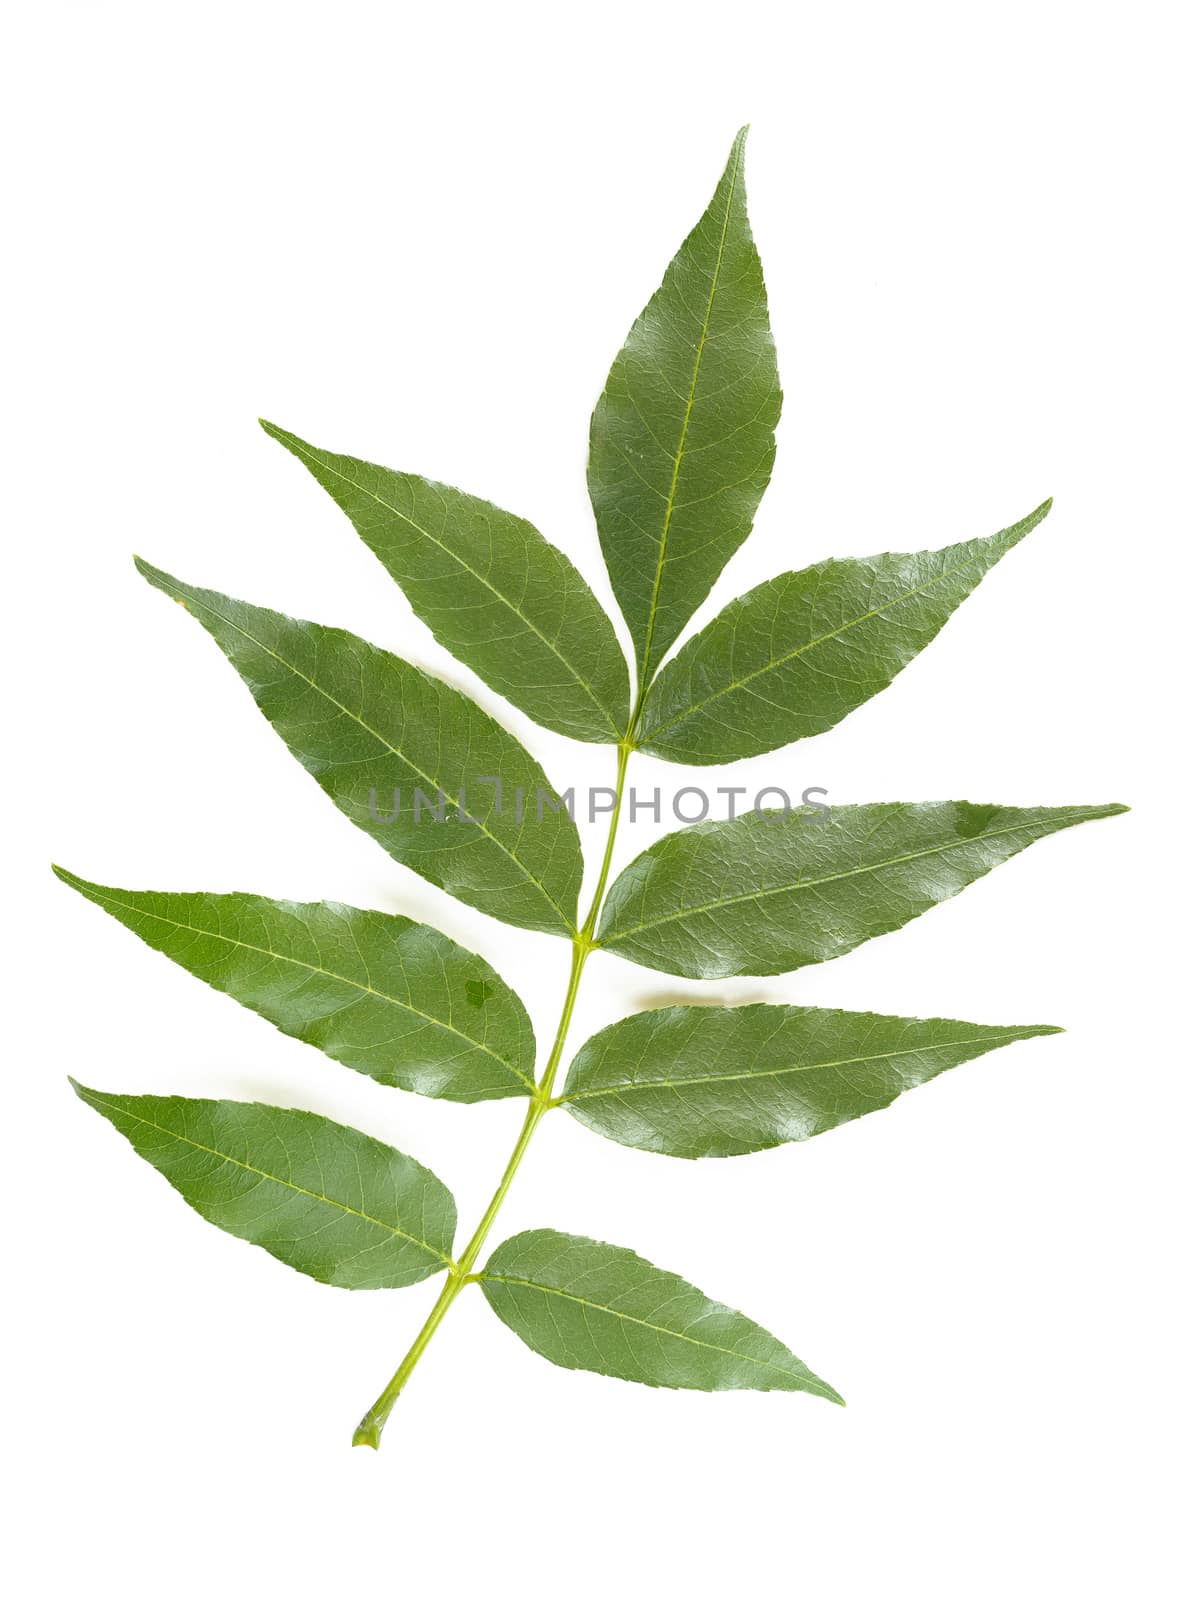 Green Ash tree Leave on white background